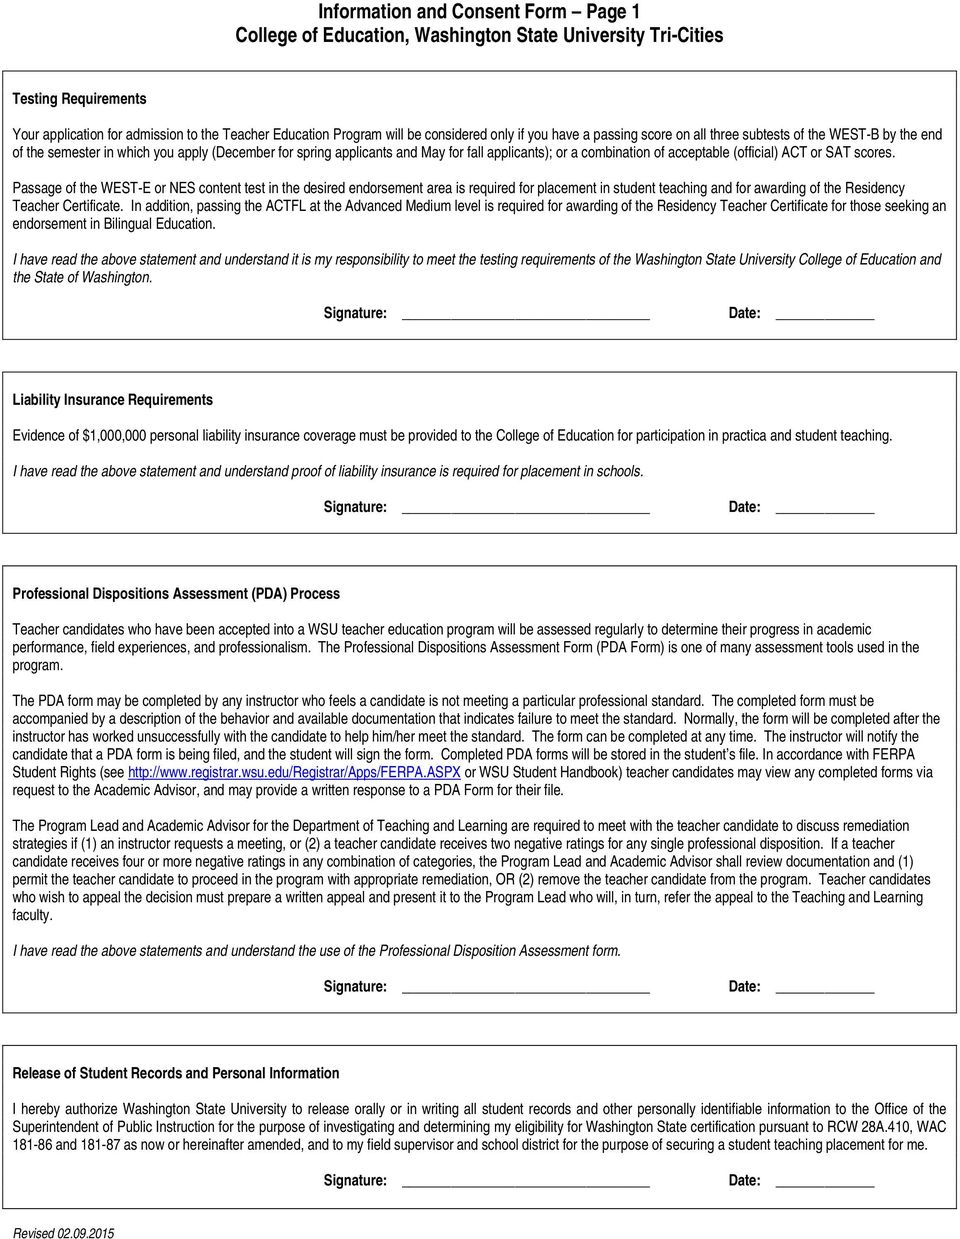 Passage of the WEST-E or NES content test in the desired endorsement area is required for placement in student teaching and for awarding of the Residency Teacher Certificate.